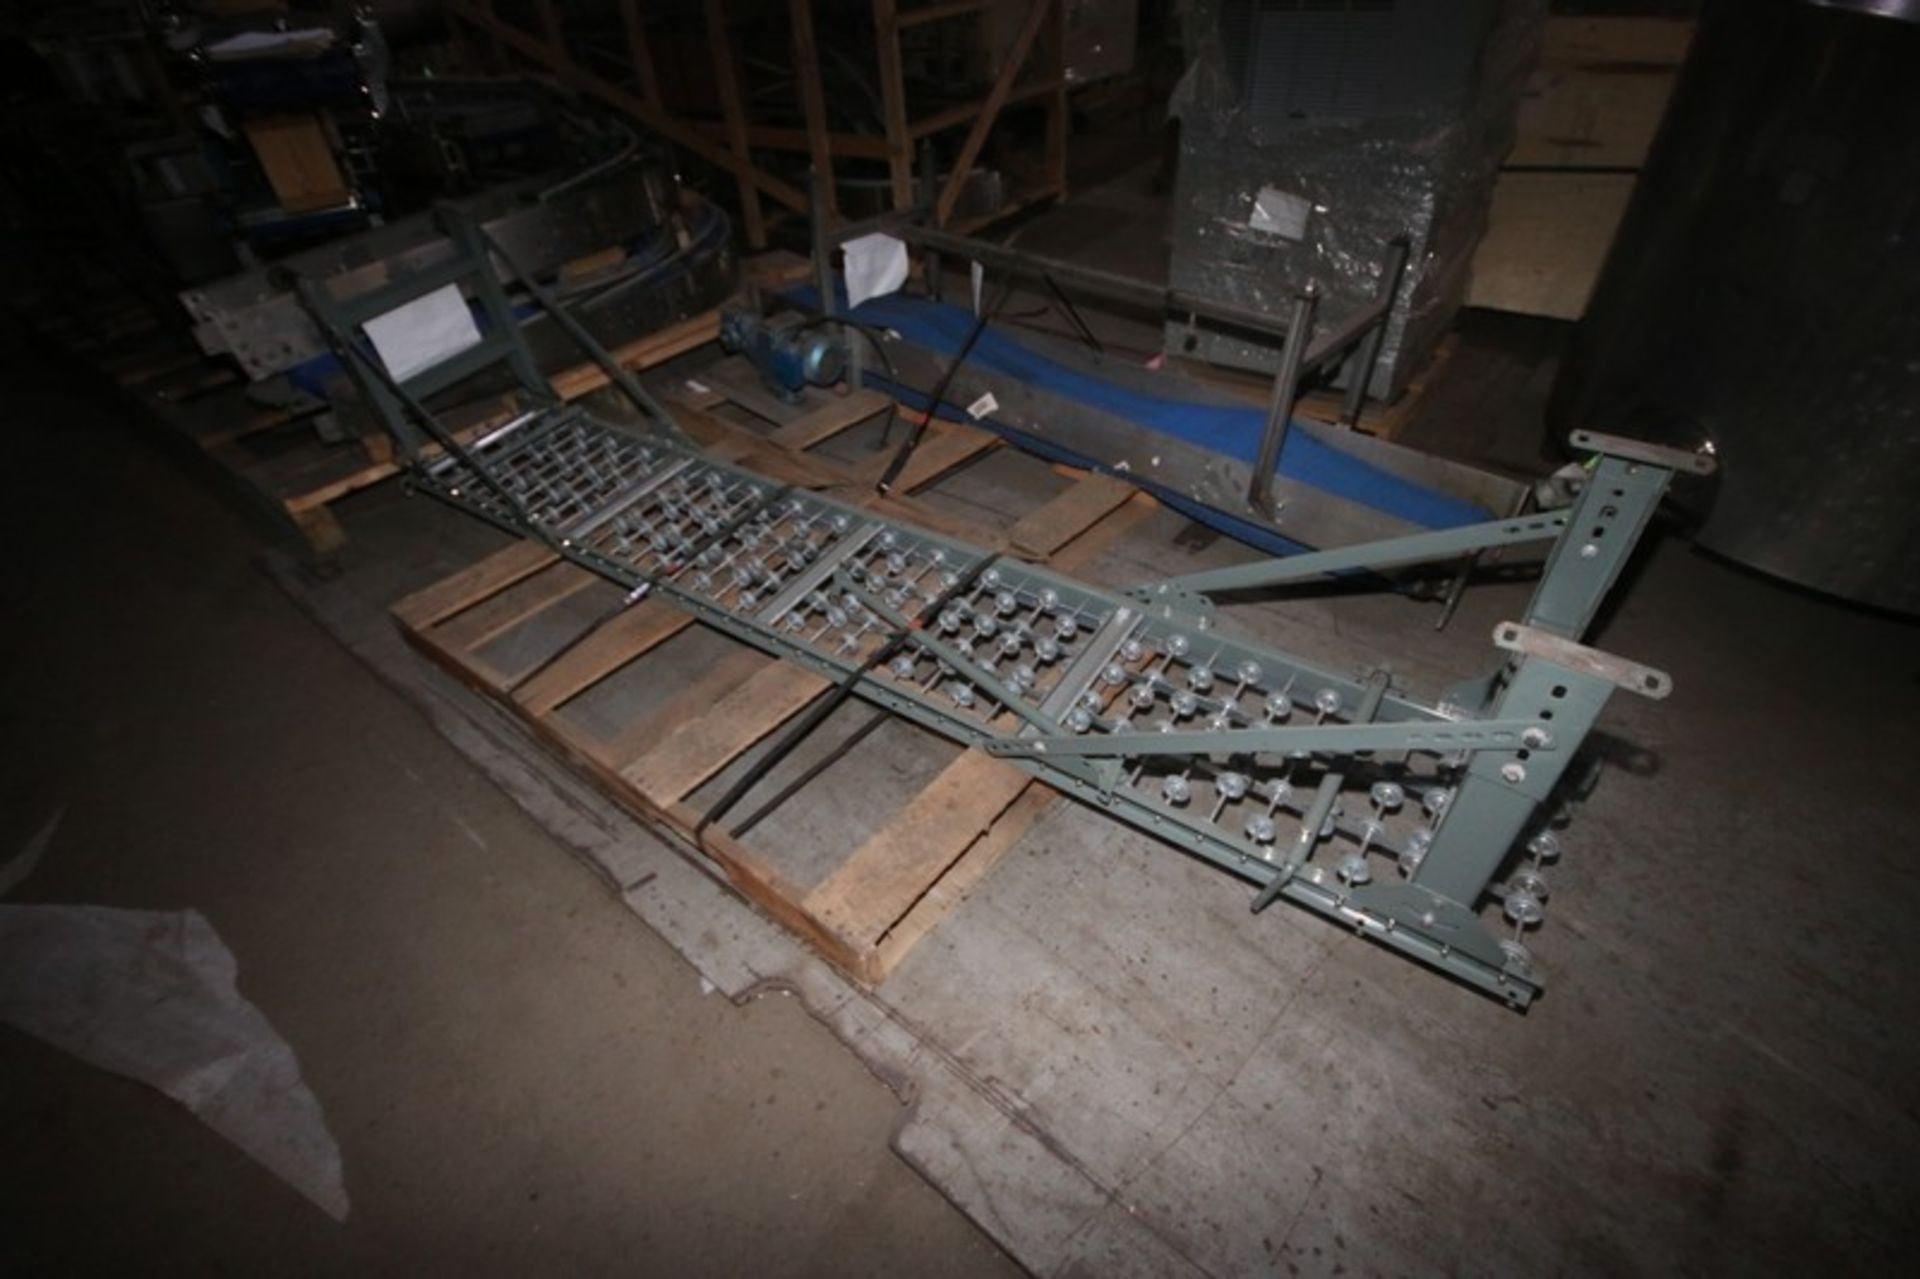 Section of Skate Conveyor, Overall Dims.: Aprox. 9'7" L x 16" W x 24" H - Image 2 of 2